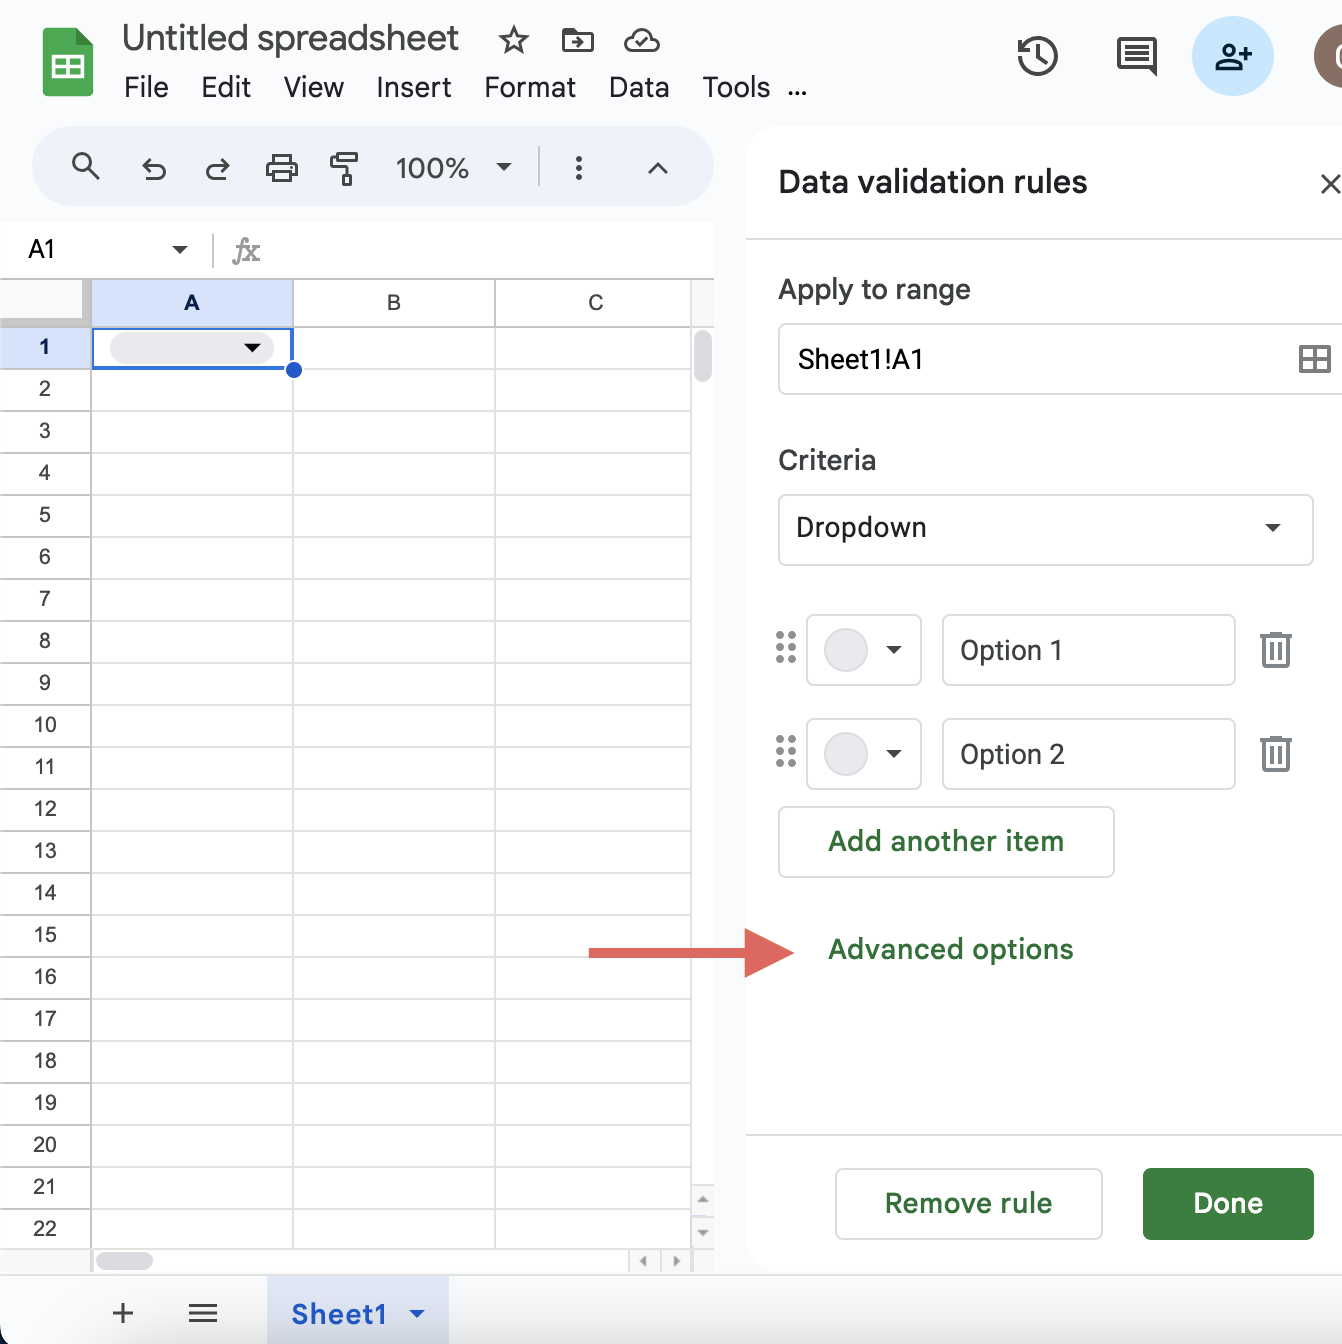 Click advanced options screenshot for the blog article "How to Add a Drop Down List in Google Sheets: A Step-by-Step Guide"